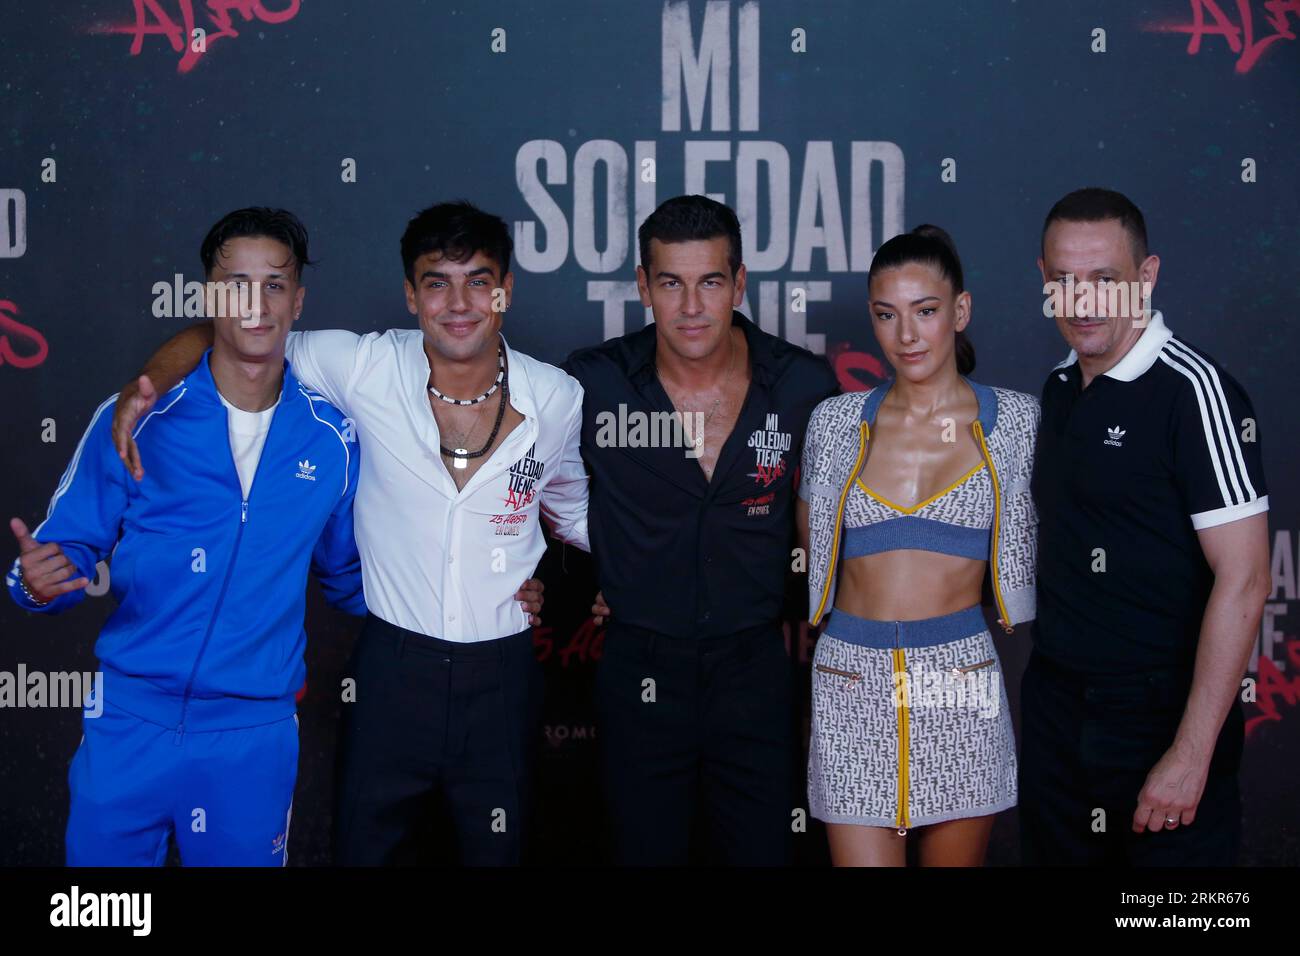 August 23, 2023, Madrid, Madrid, Spain: The Spanish actors from left to right, Farid Bechara (L), Oscar Casas (2L), Mario Casas (C), Candela Gonzalez (2R) and Francisco Boira (R), pose during a photocall for the media, on Wednesday, August 23, 2023, prior to the premiere of the film 'Mi soledad tiene alas', in Madrid (Spain). Mario Casas, winner of a Goya for best leading actor for the film 'No mataras', makes the leap into production and directing with his first film 'Mi soledad tiene alas', which will be released in theaters on August 25. The film, set in the neighborhoods where the director Stock Photo